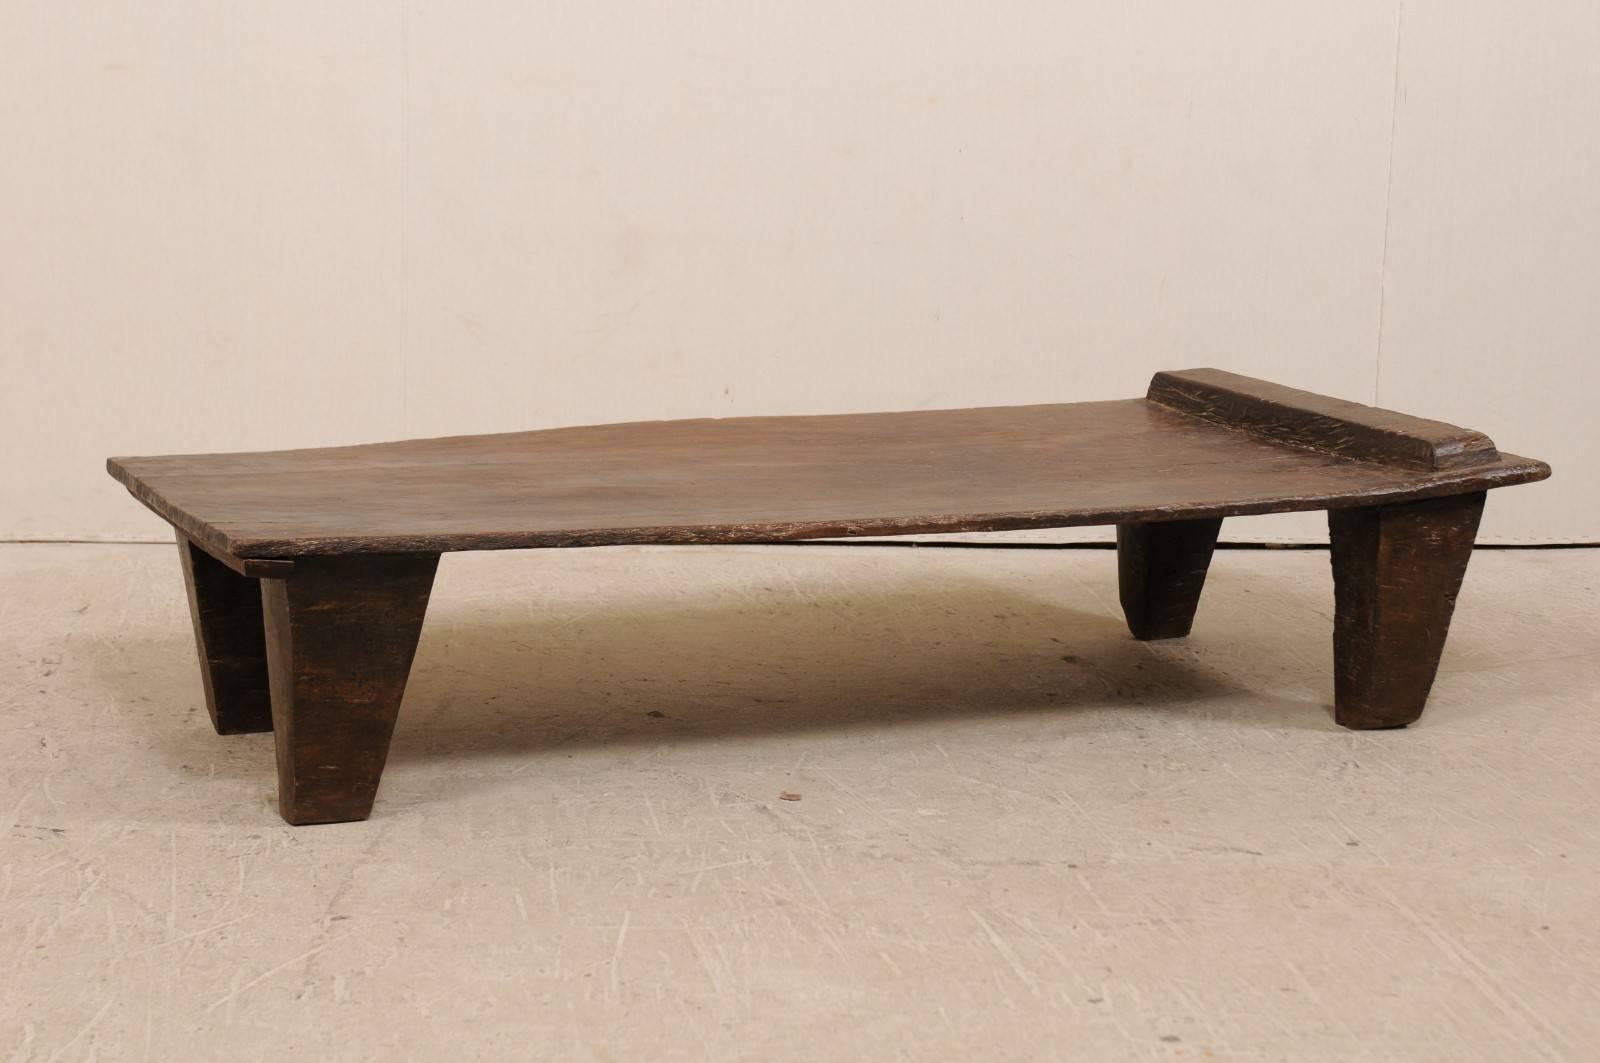 A primitive wood Naga coffee table from the early 20th century. This antique piece originated as a wood bed from the Naga tribes of Nagaland, North East India. It has been carved out of a single log, is raised on four widely carved feet and has a